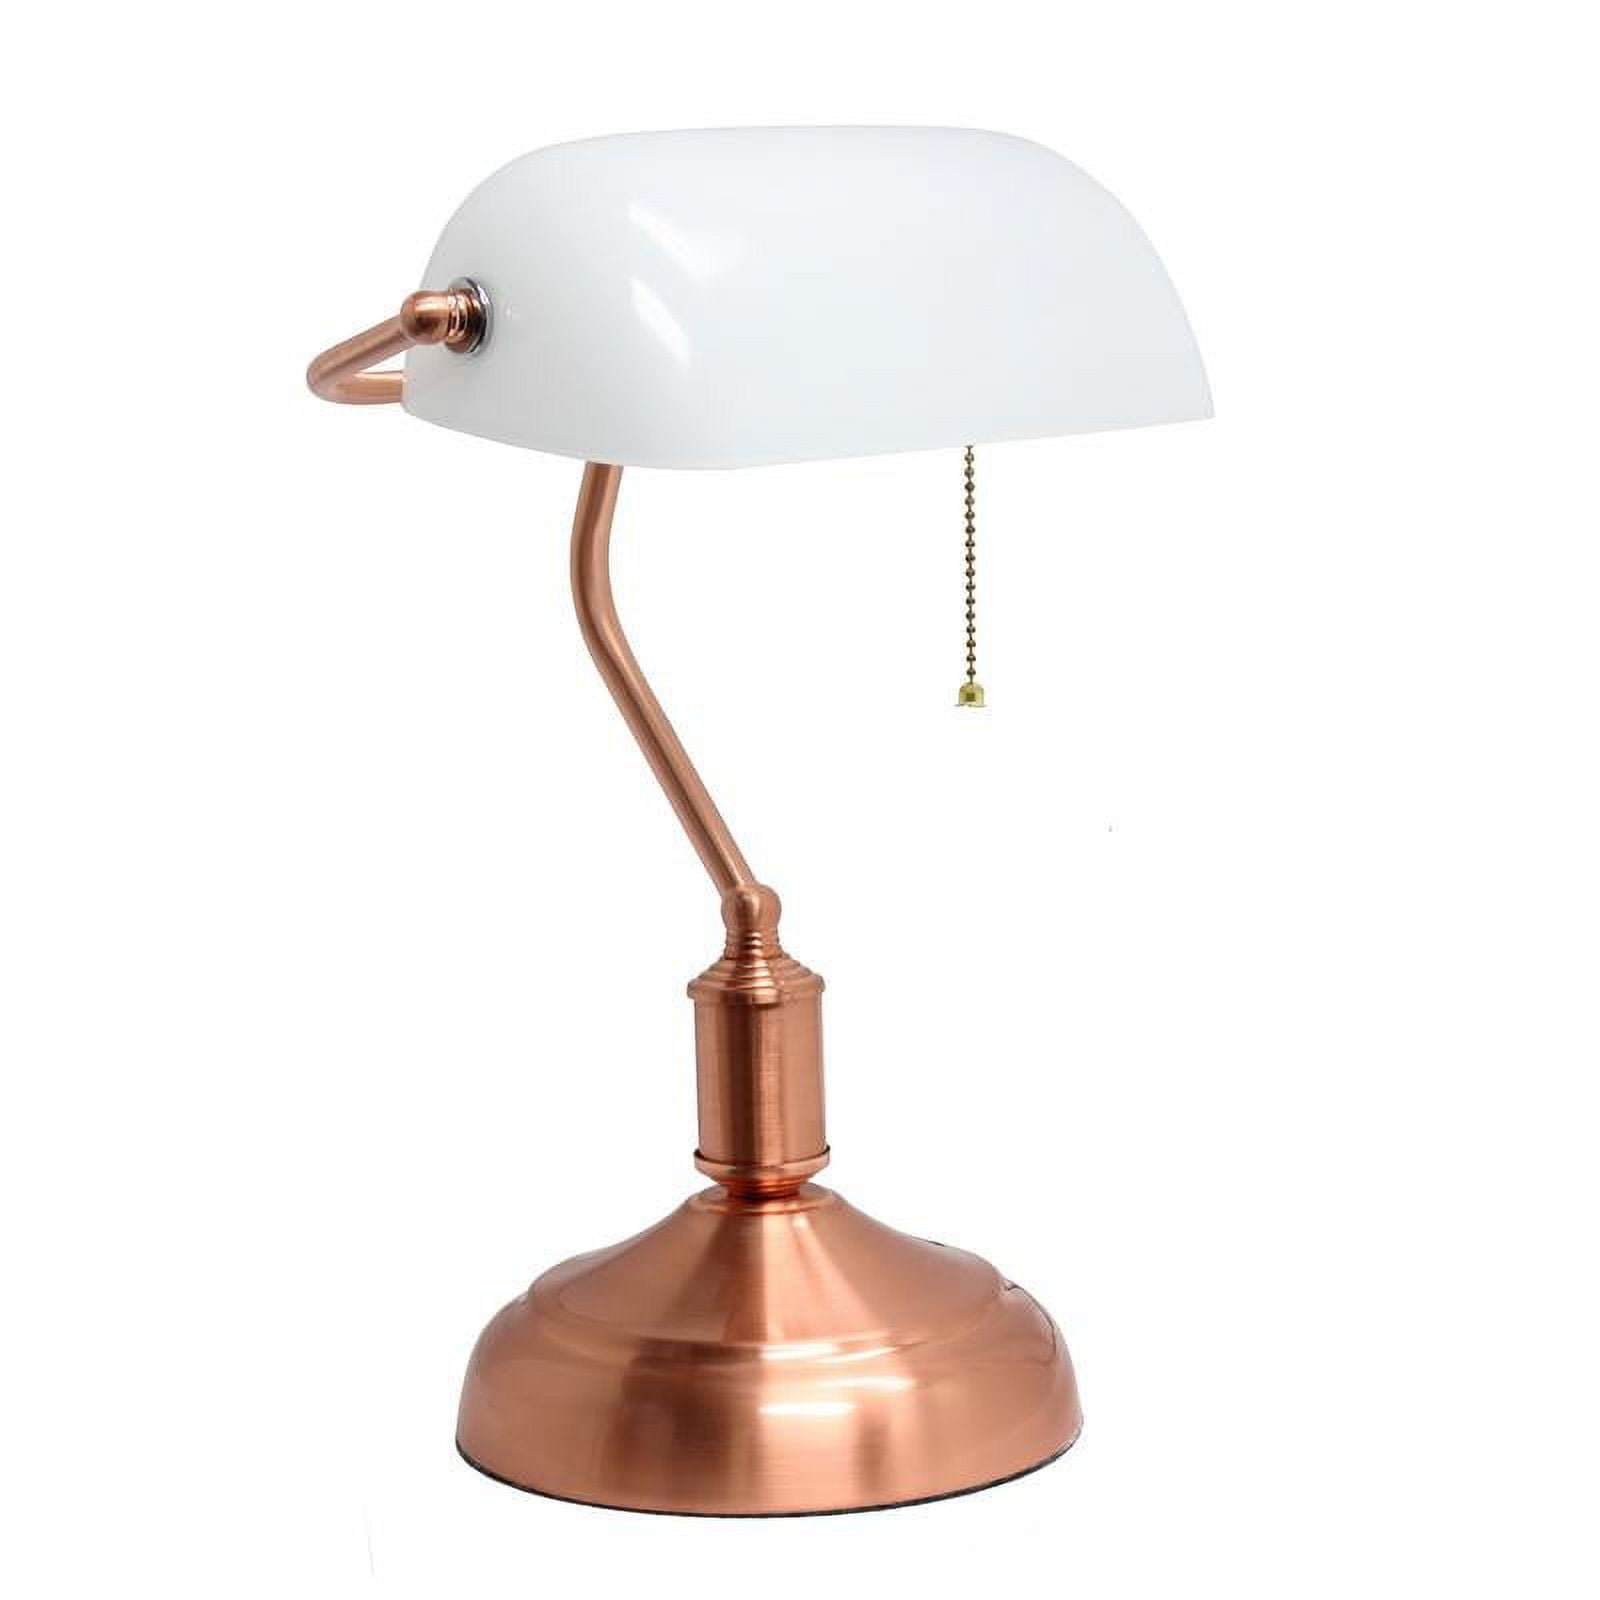 Lt3216-rgd Executive Bankers Desk Lamp With White Glass Shade, Rose Gold